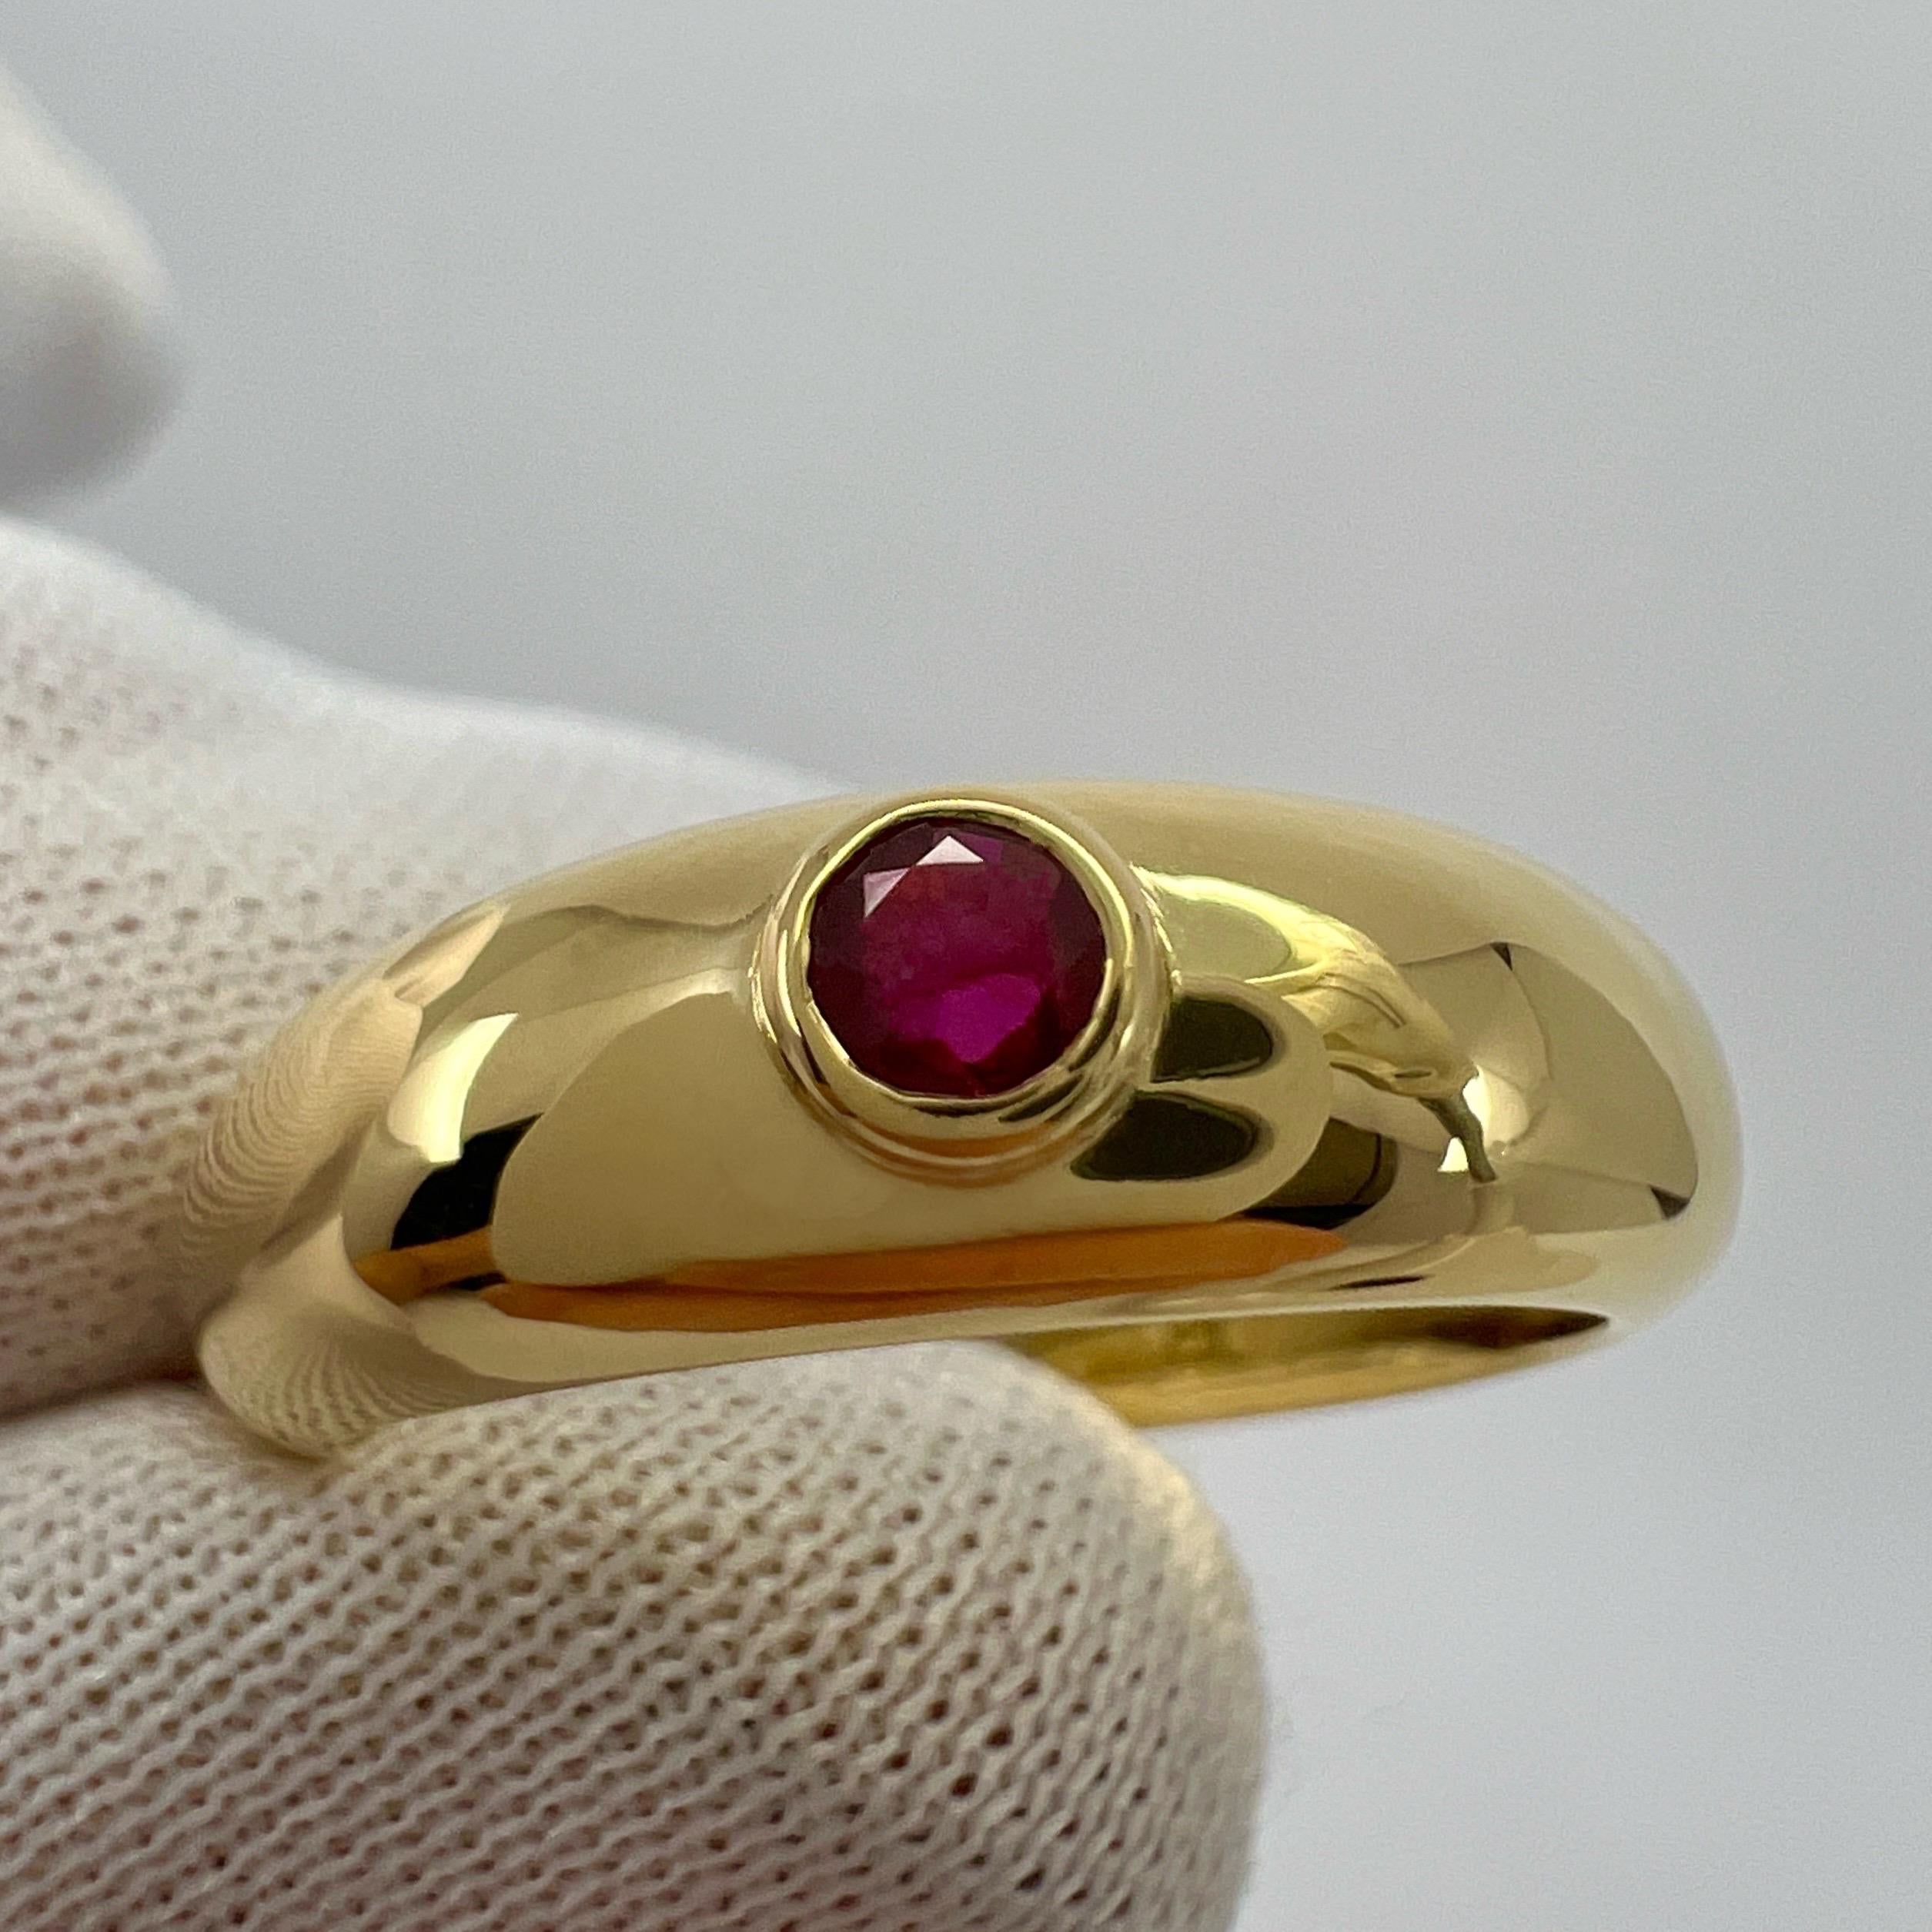 Vintage Cartier Round Cut Red Ruby 18k Yellow Gold Signet Style Domed Ring US5.5 For Sale 4